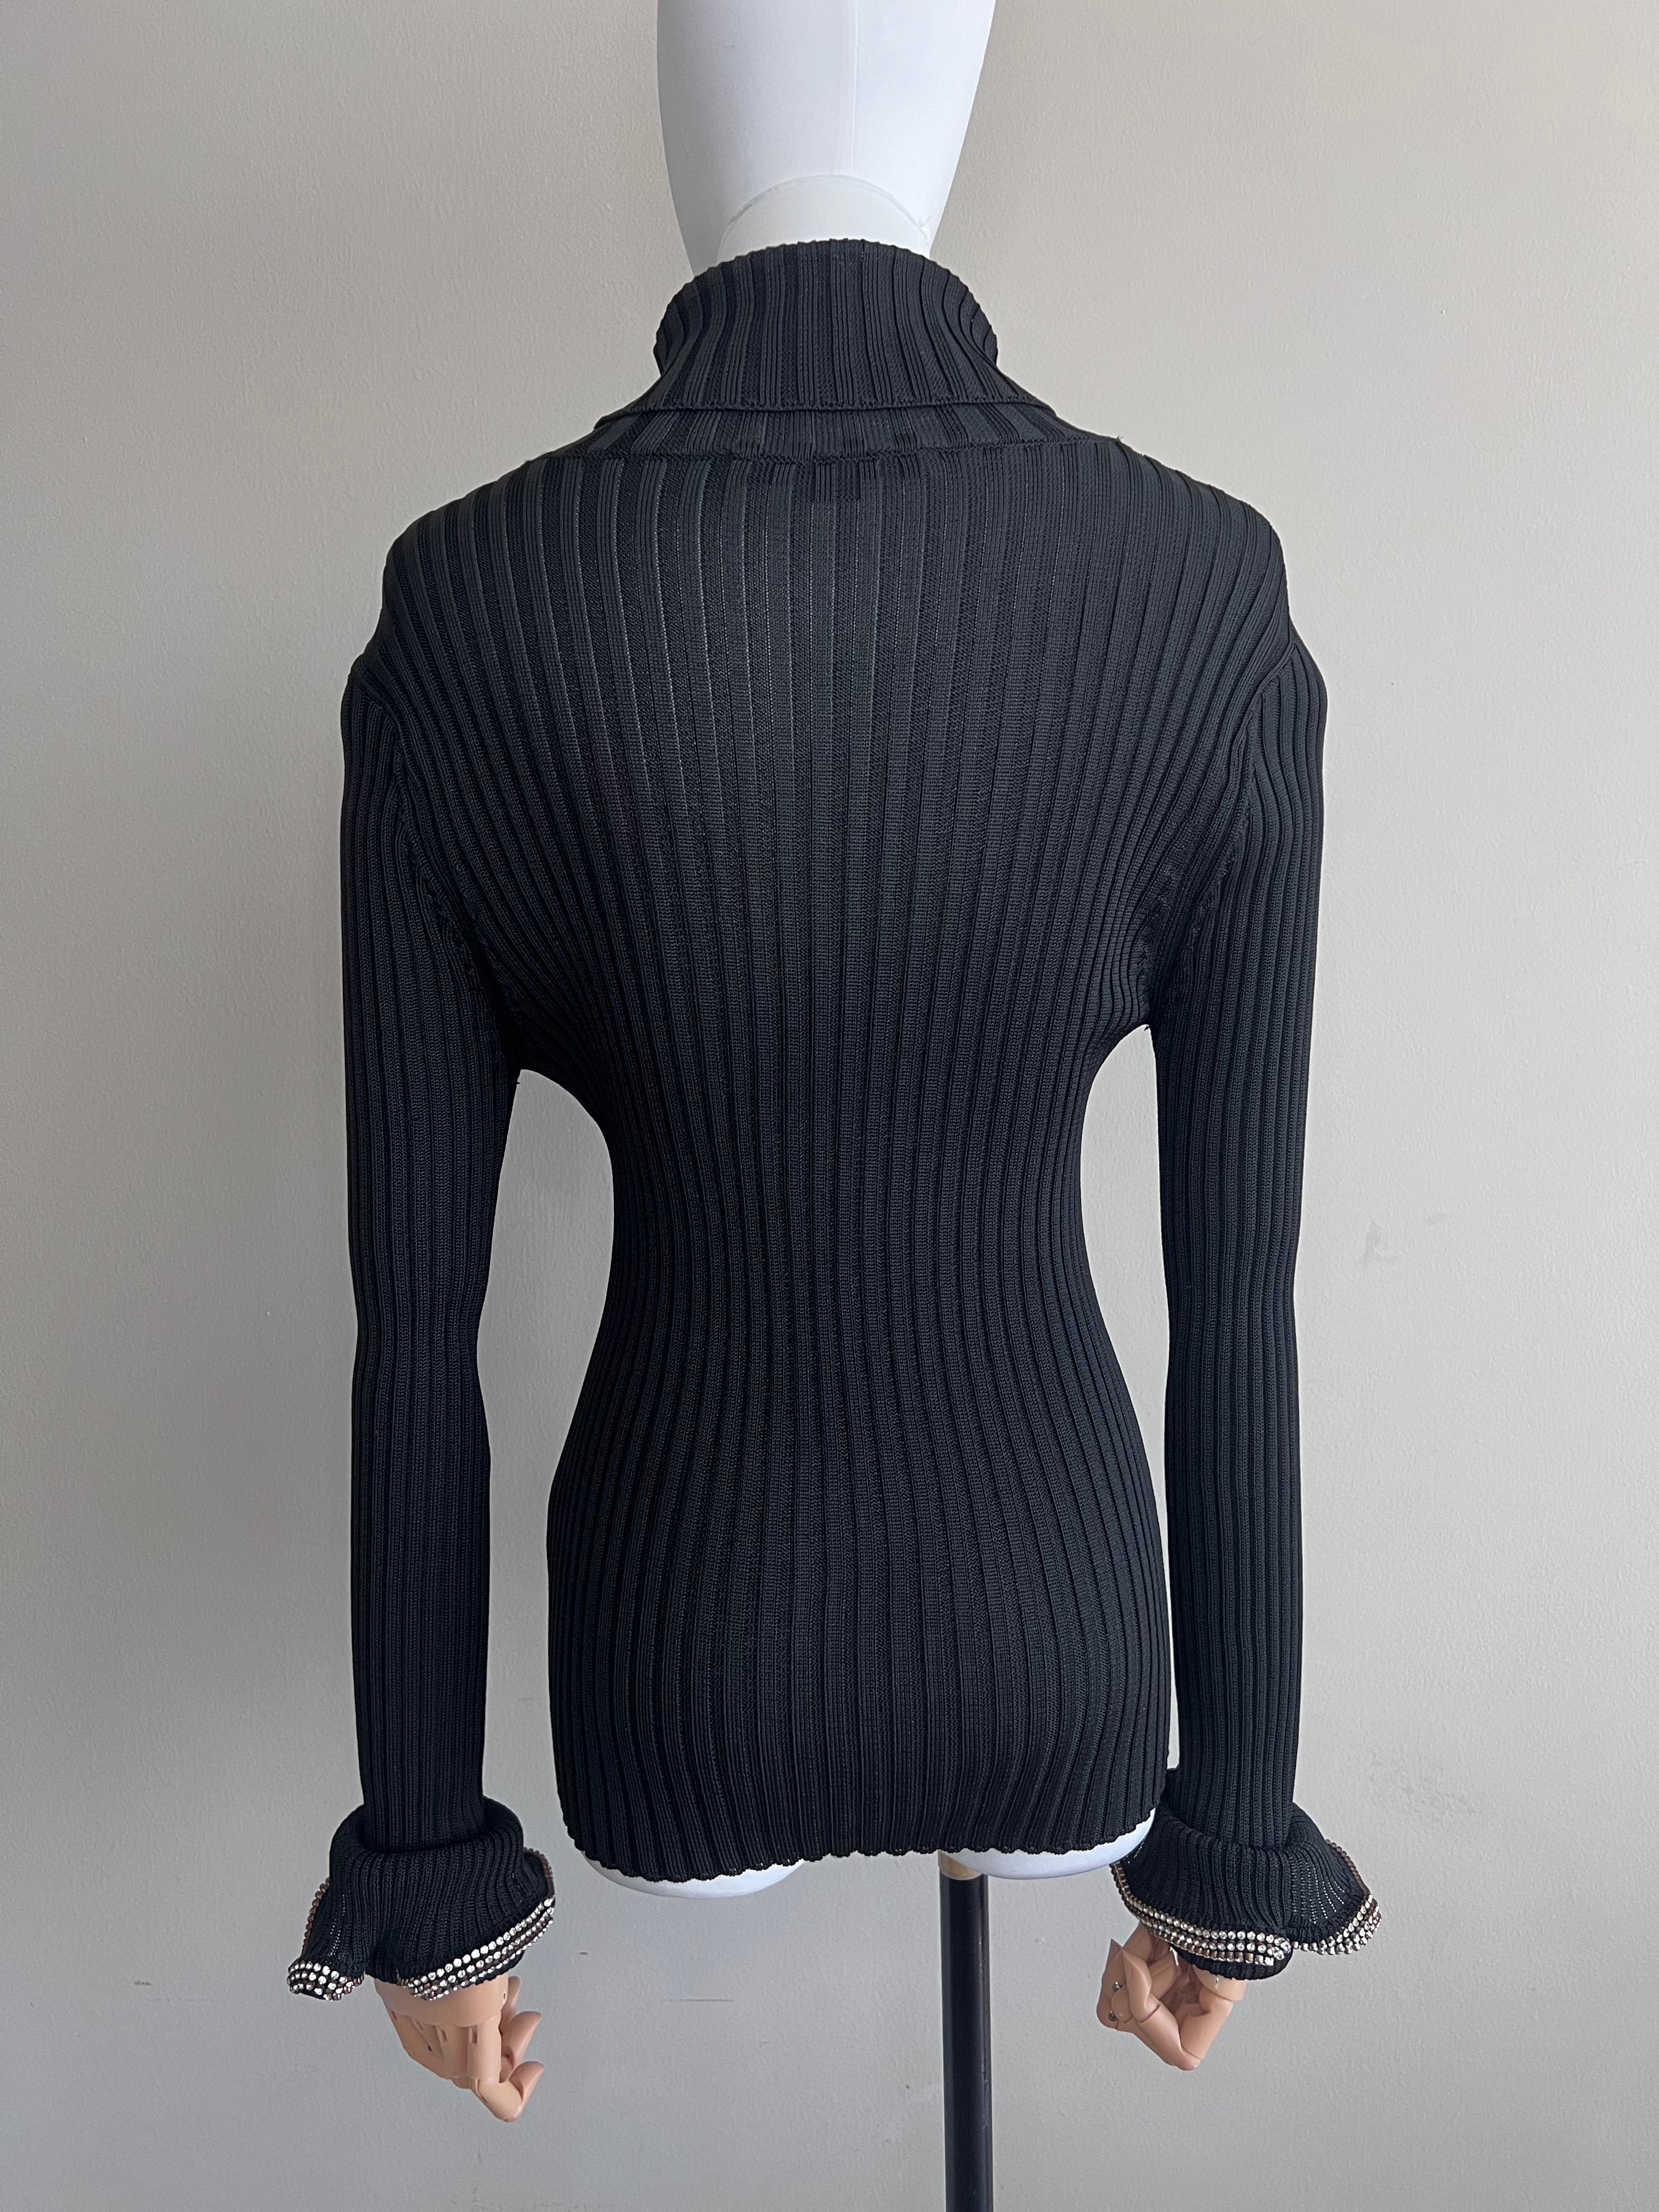 Black Turtle neck longsleeves knitted sweater with embelished silver stones - ALEXANDER WANG